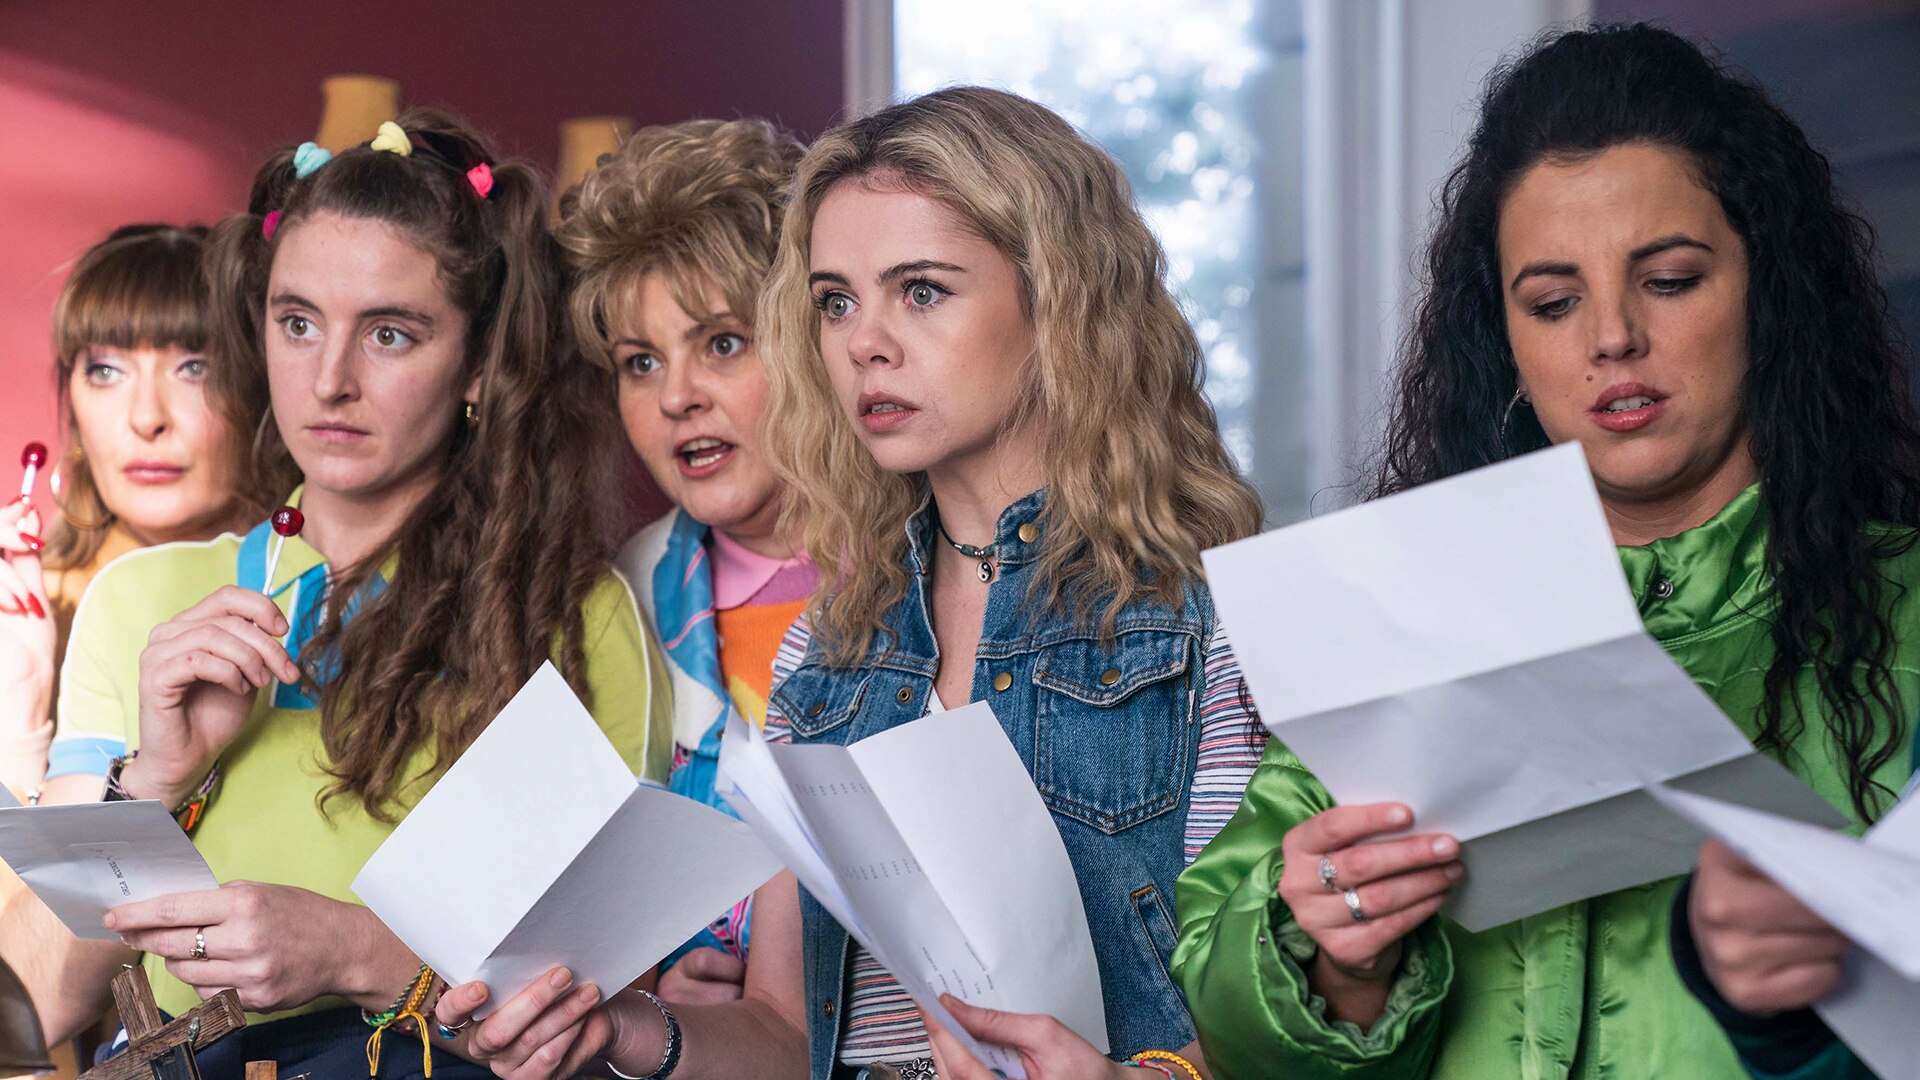 Goodbye to Derry Girls, the Last of Its Kind as a Comedy Focused on Women